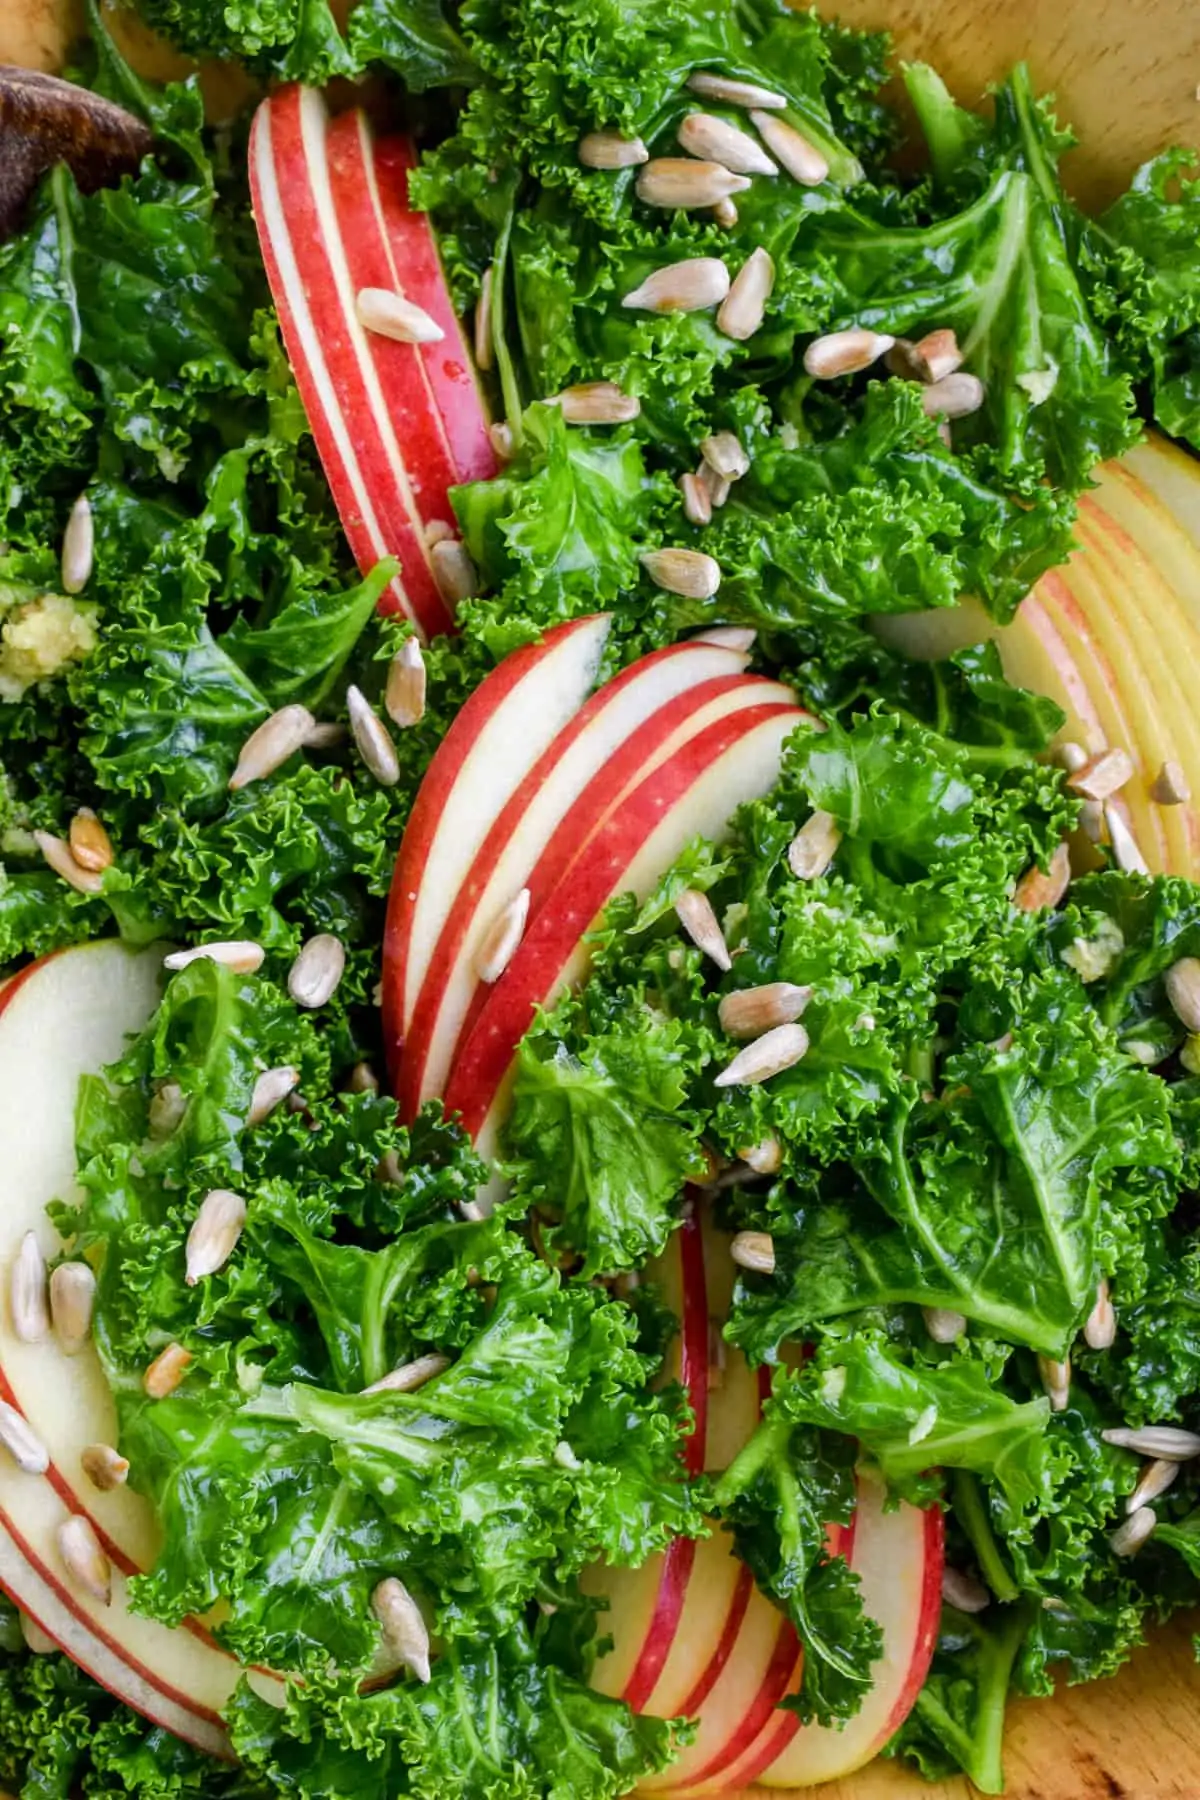 Slices of Braeburn apple are fanned and arranged on top of the massaged kale.